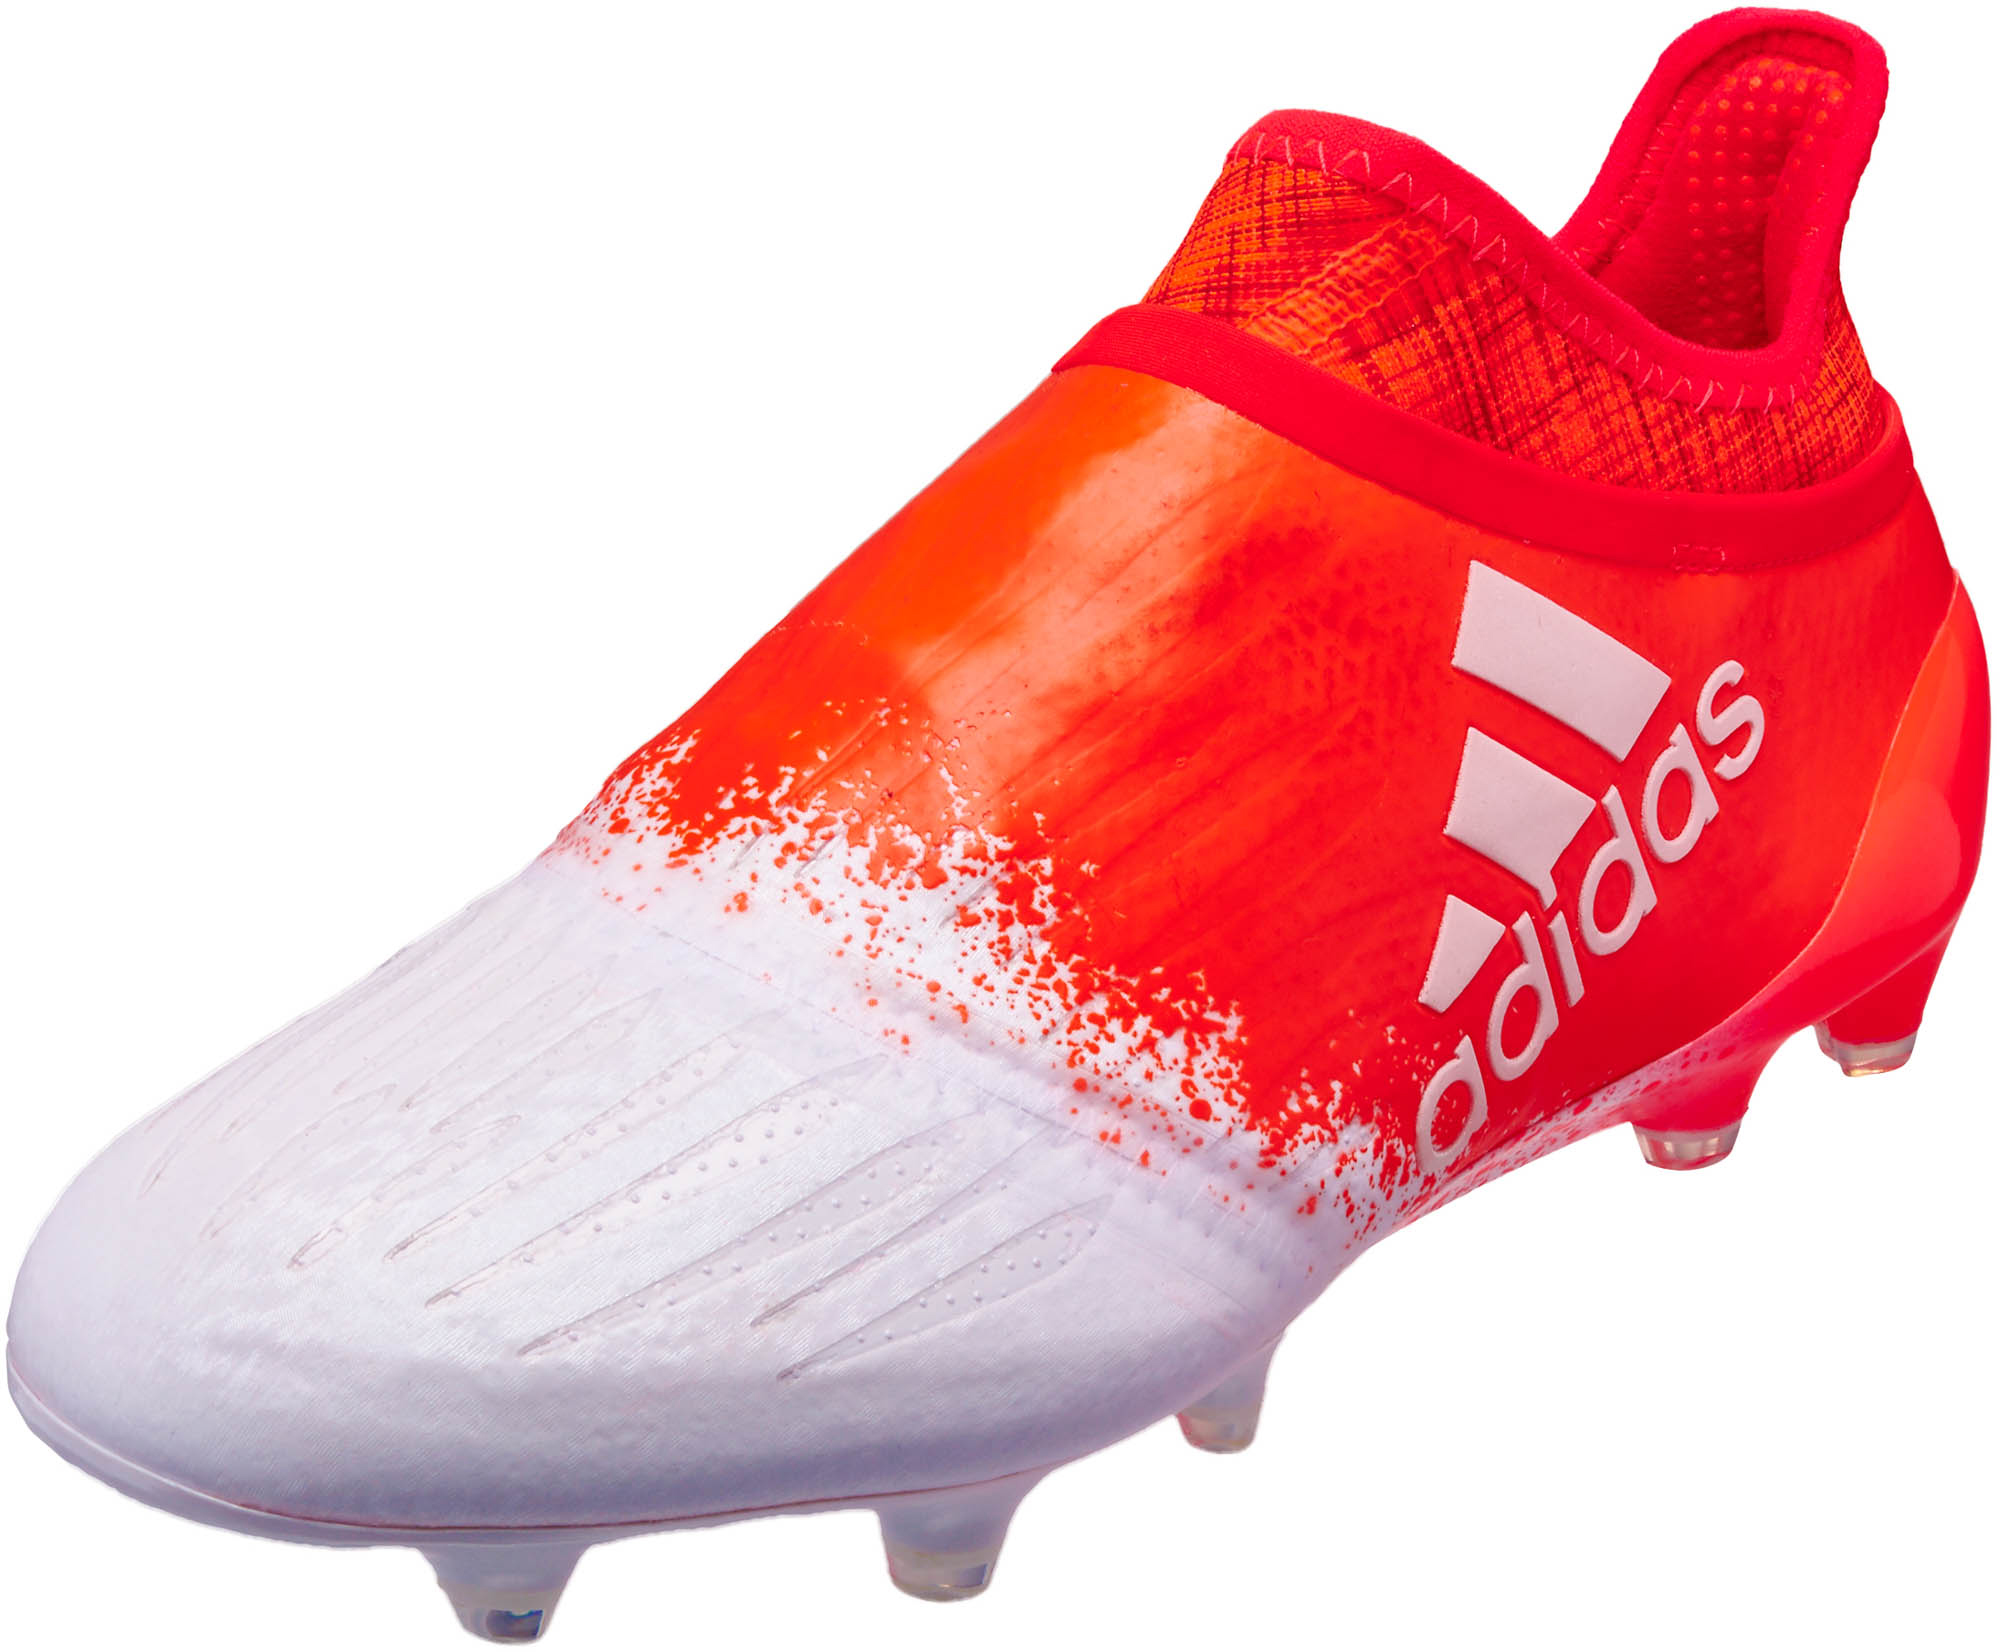 adidas pure speed cleats